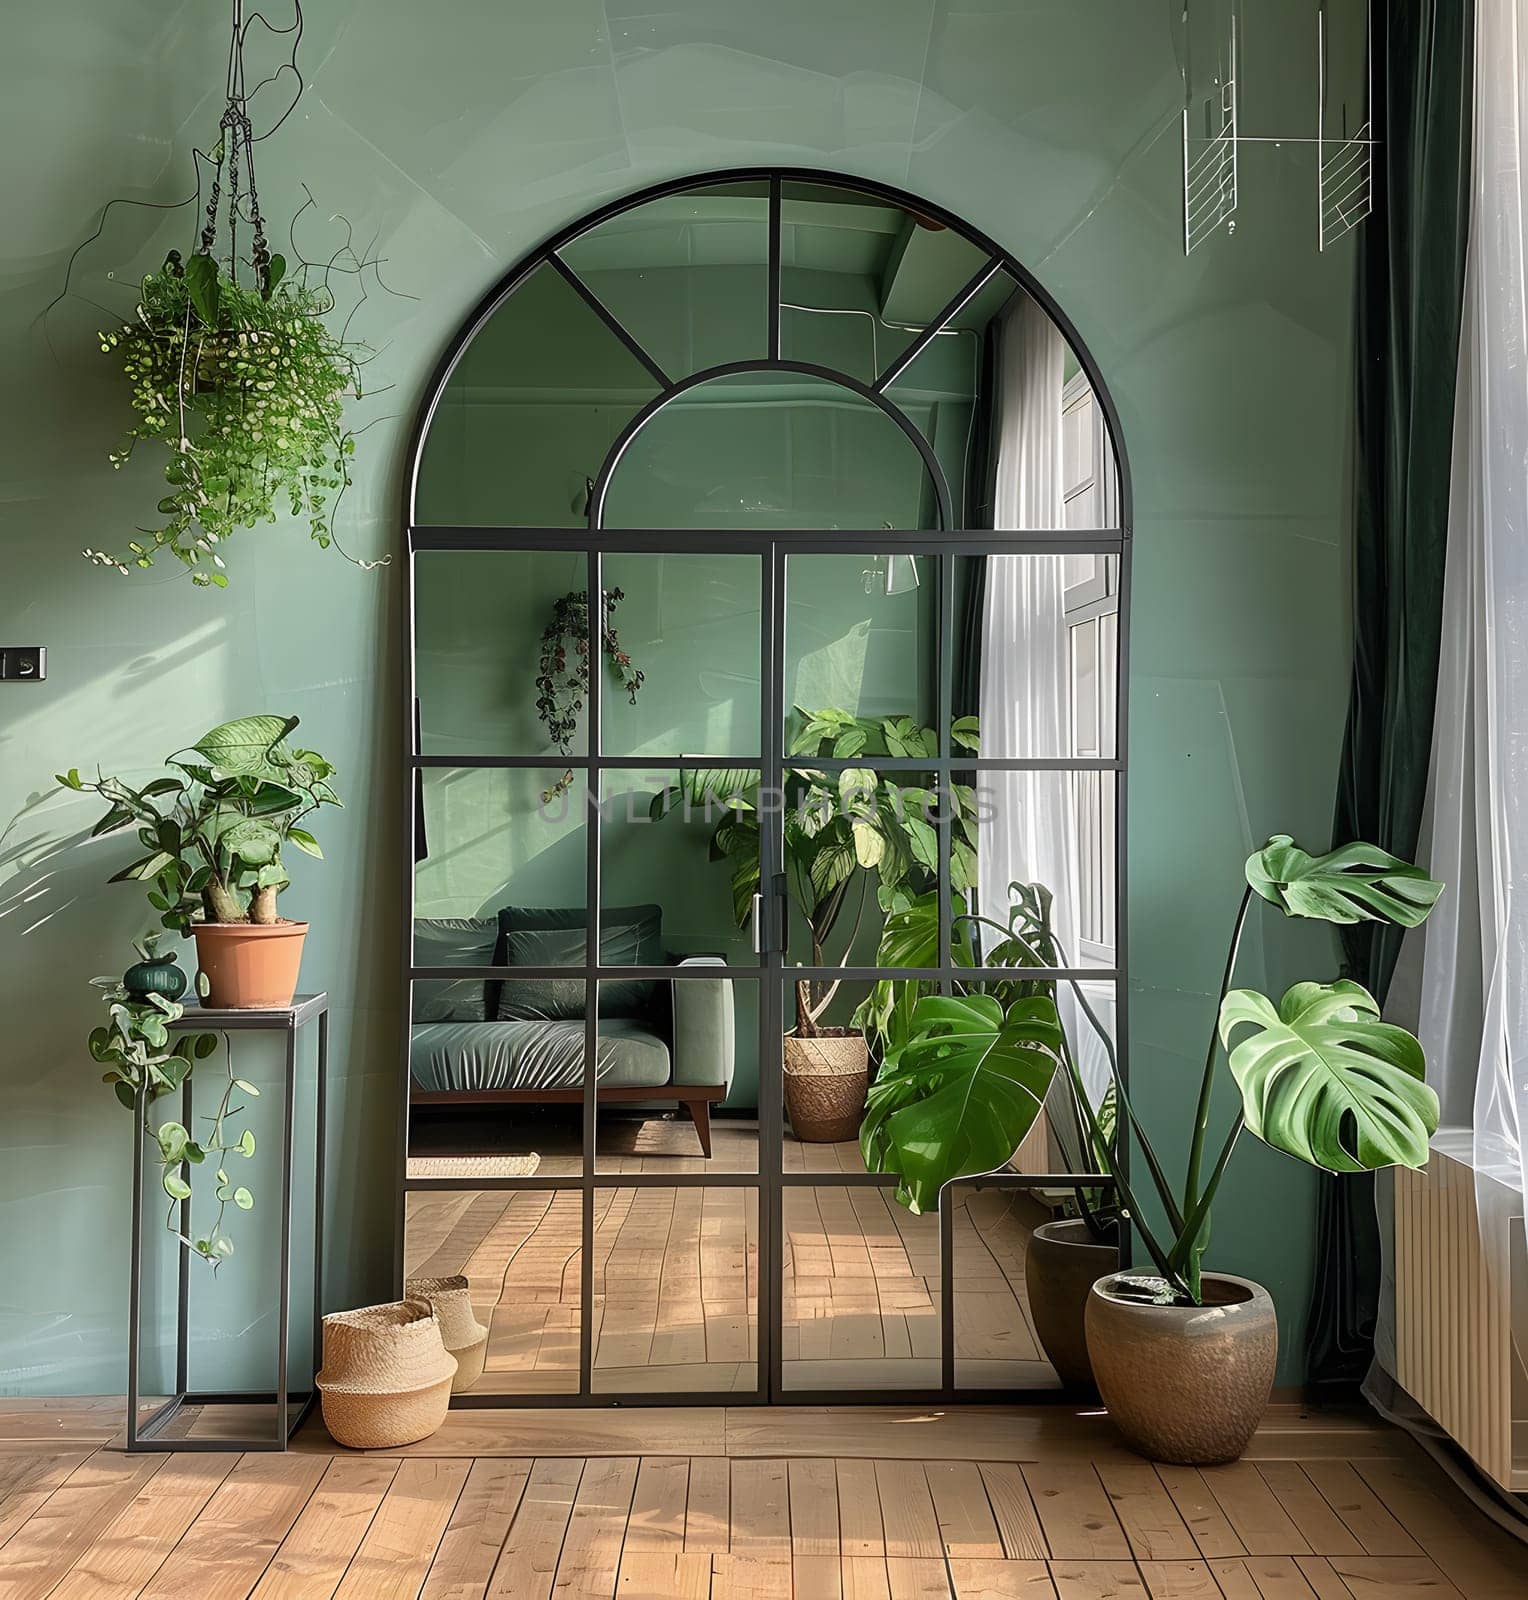 The room features a large mirror as a central fixture, complemented by houseplants in flowerpots. The wood floors and windows create a warm, inviting atmosphere in the building